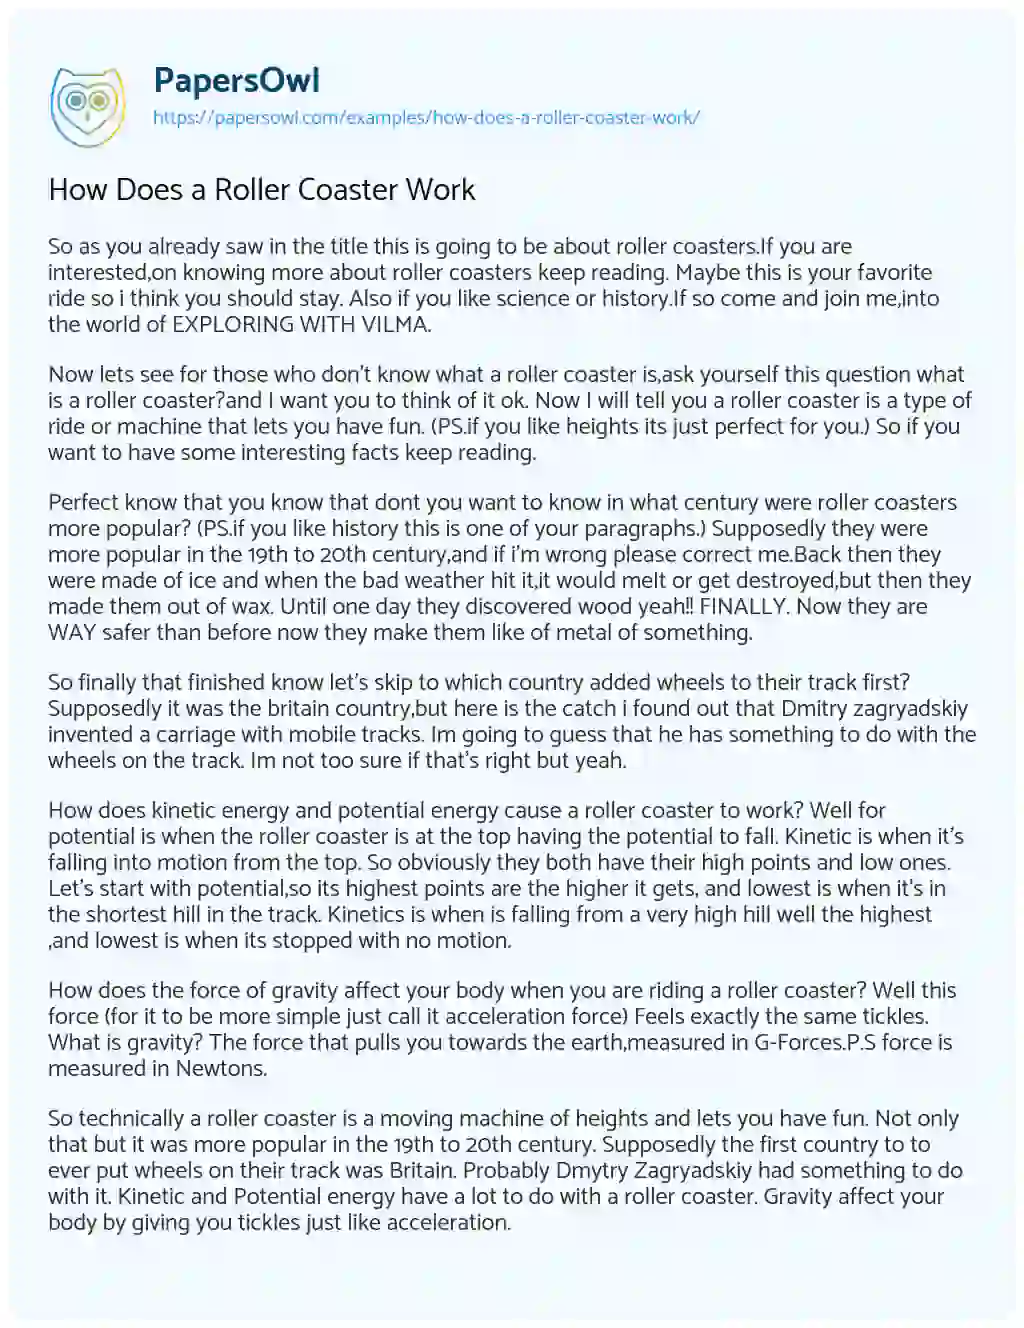 Essay on How does a Roller Coaster Work